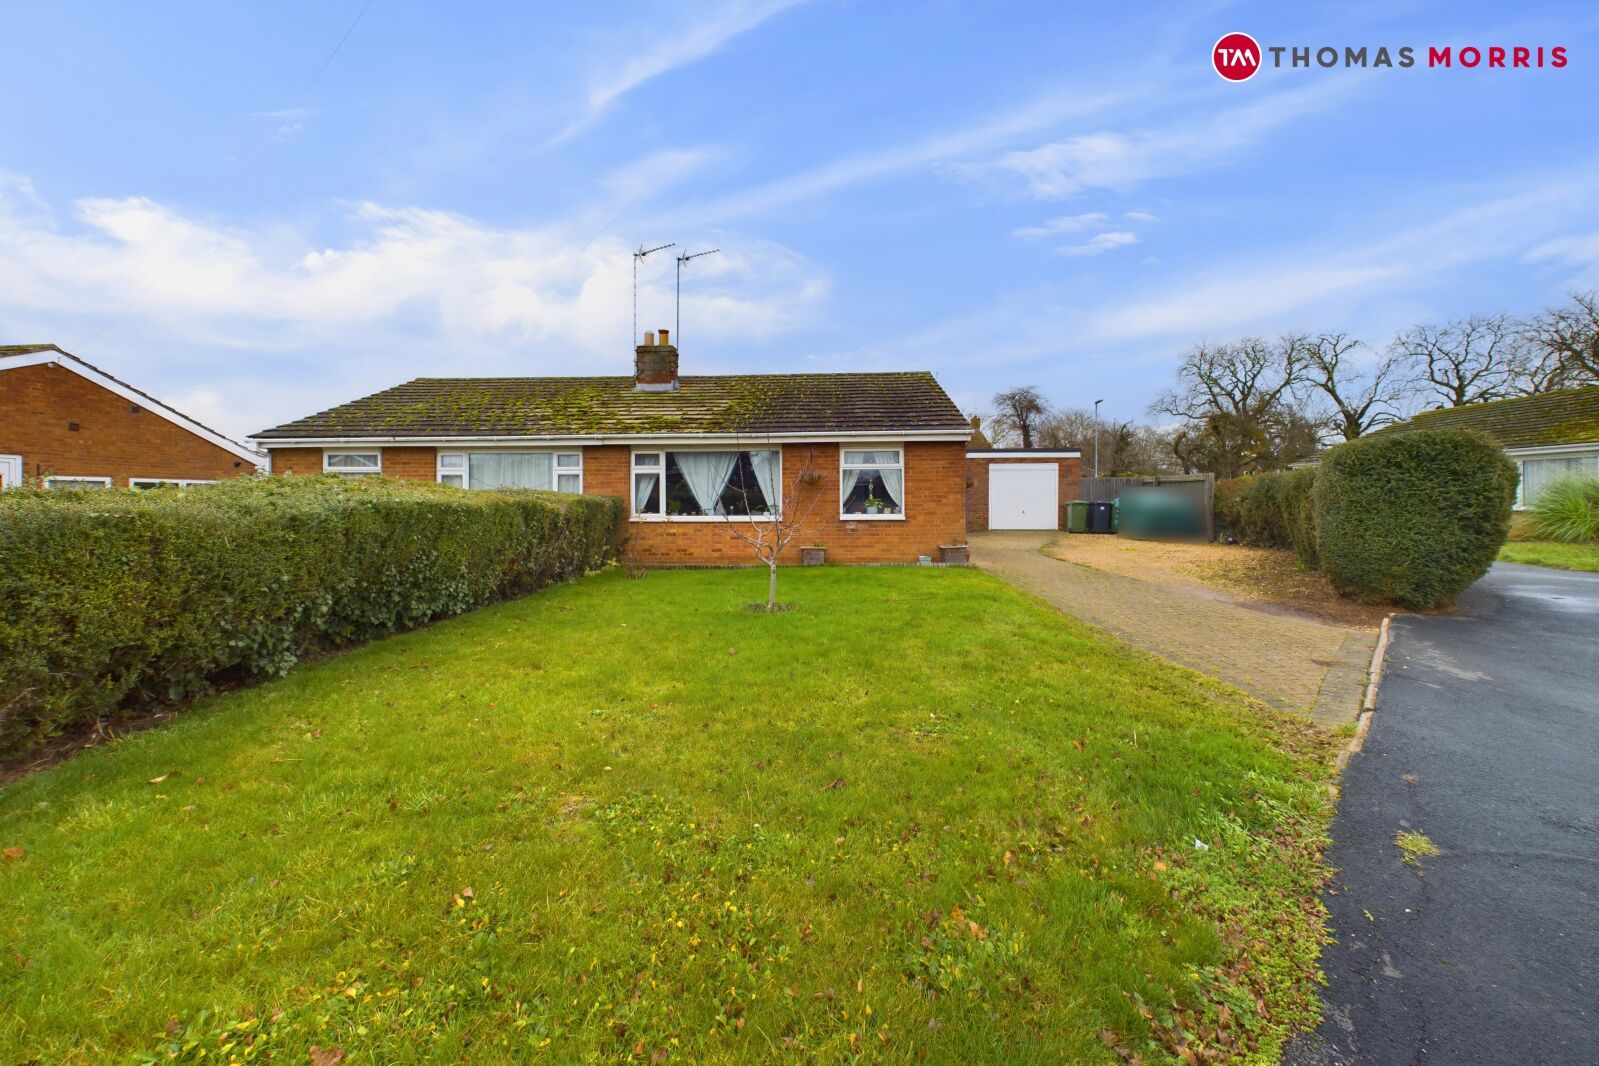 2 bedroom semi detached bungalow for sale Whitehouse Road, Sawtry, PE28, main image